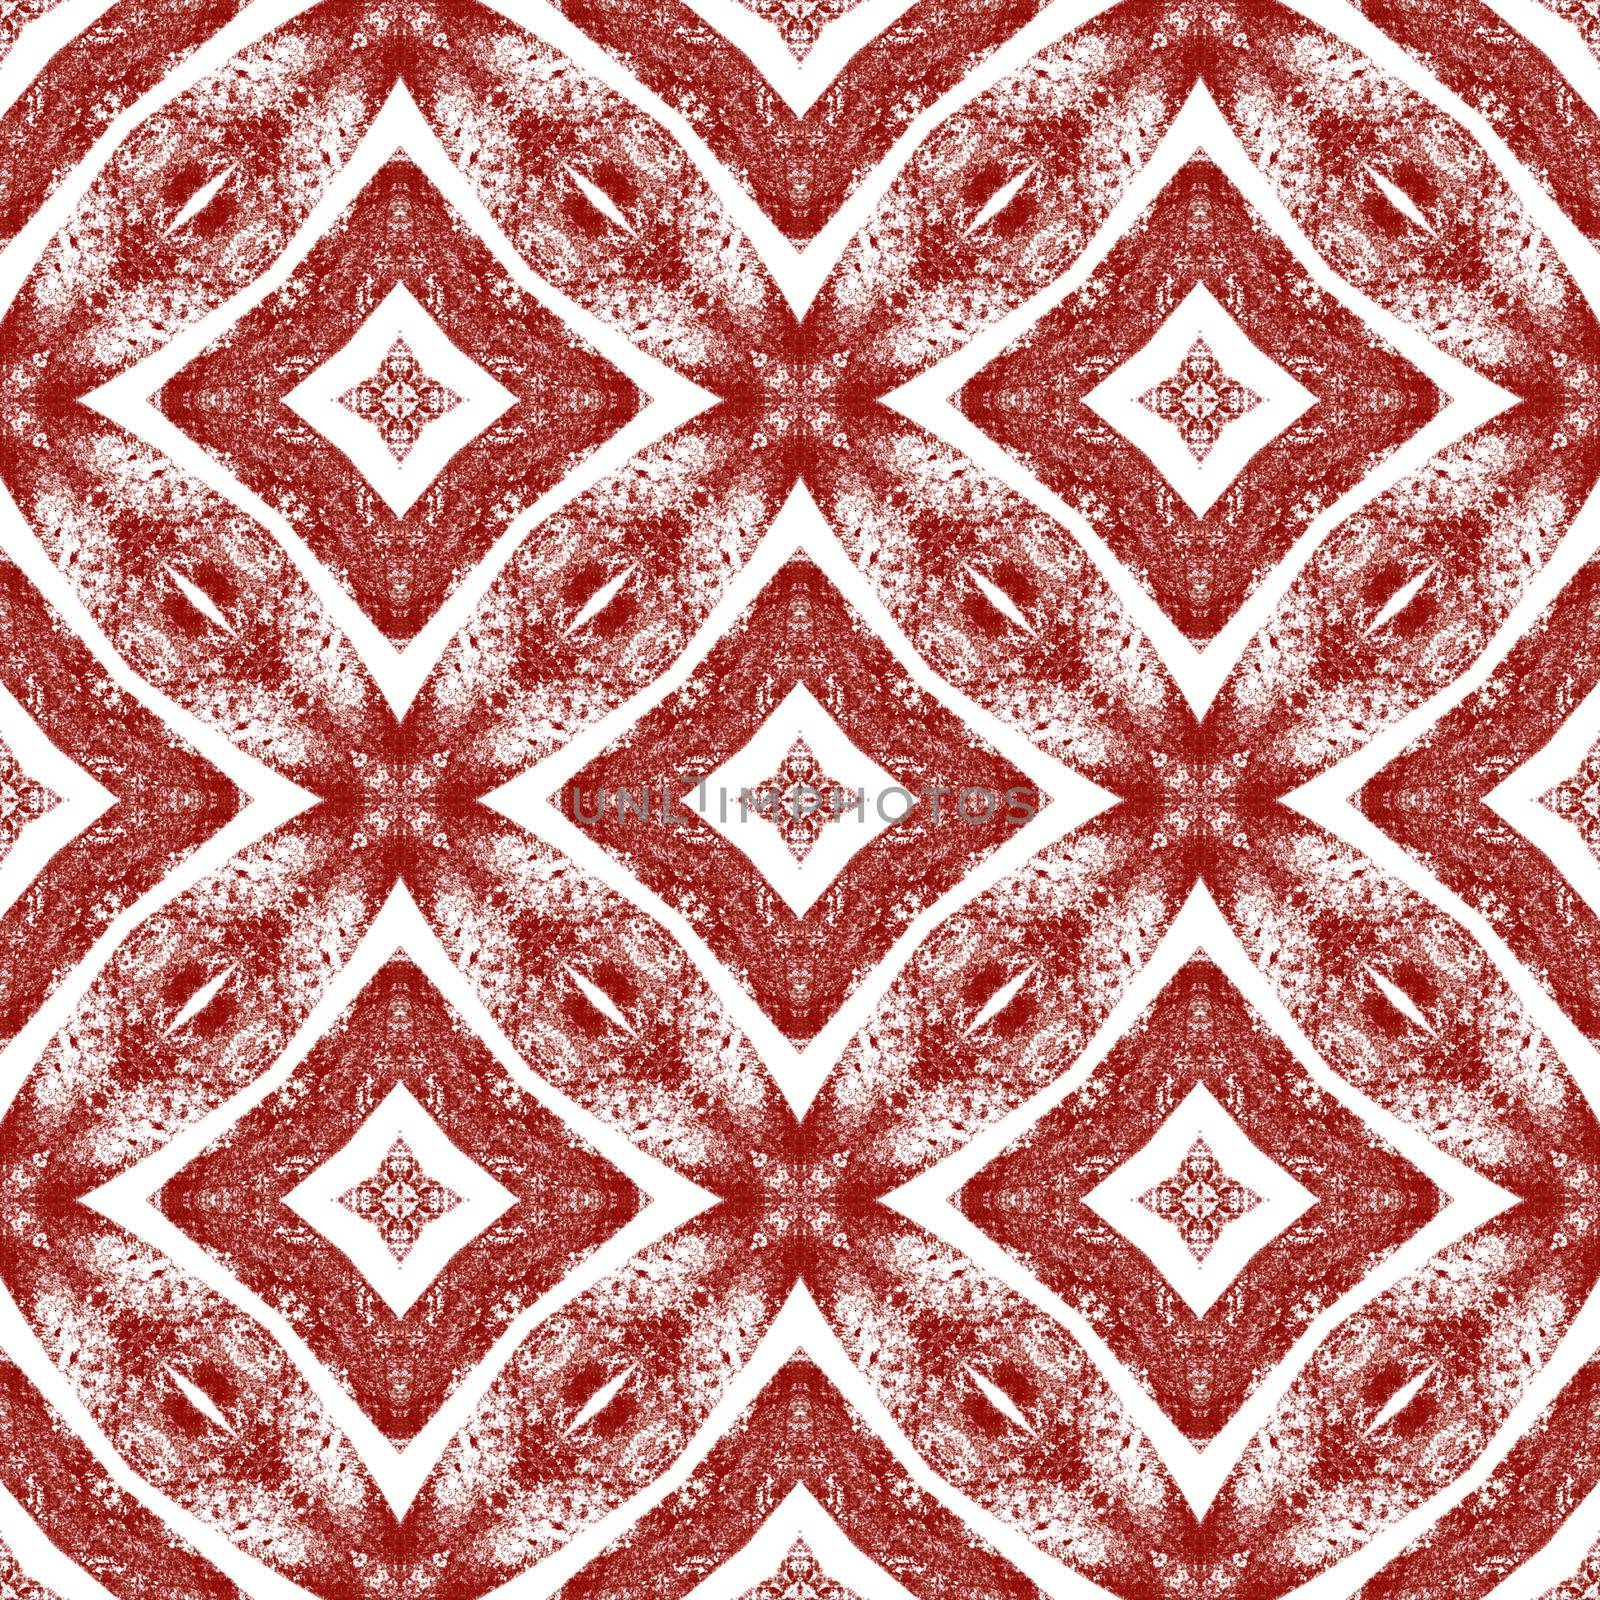 Ethnic hand painted pattern. Wine red by beginagain